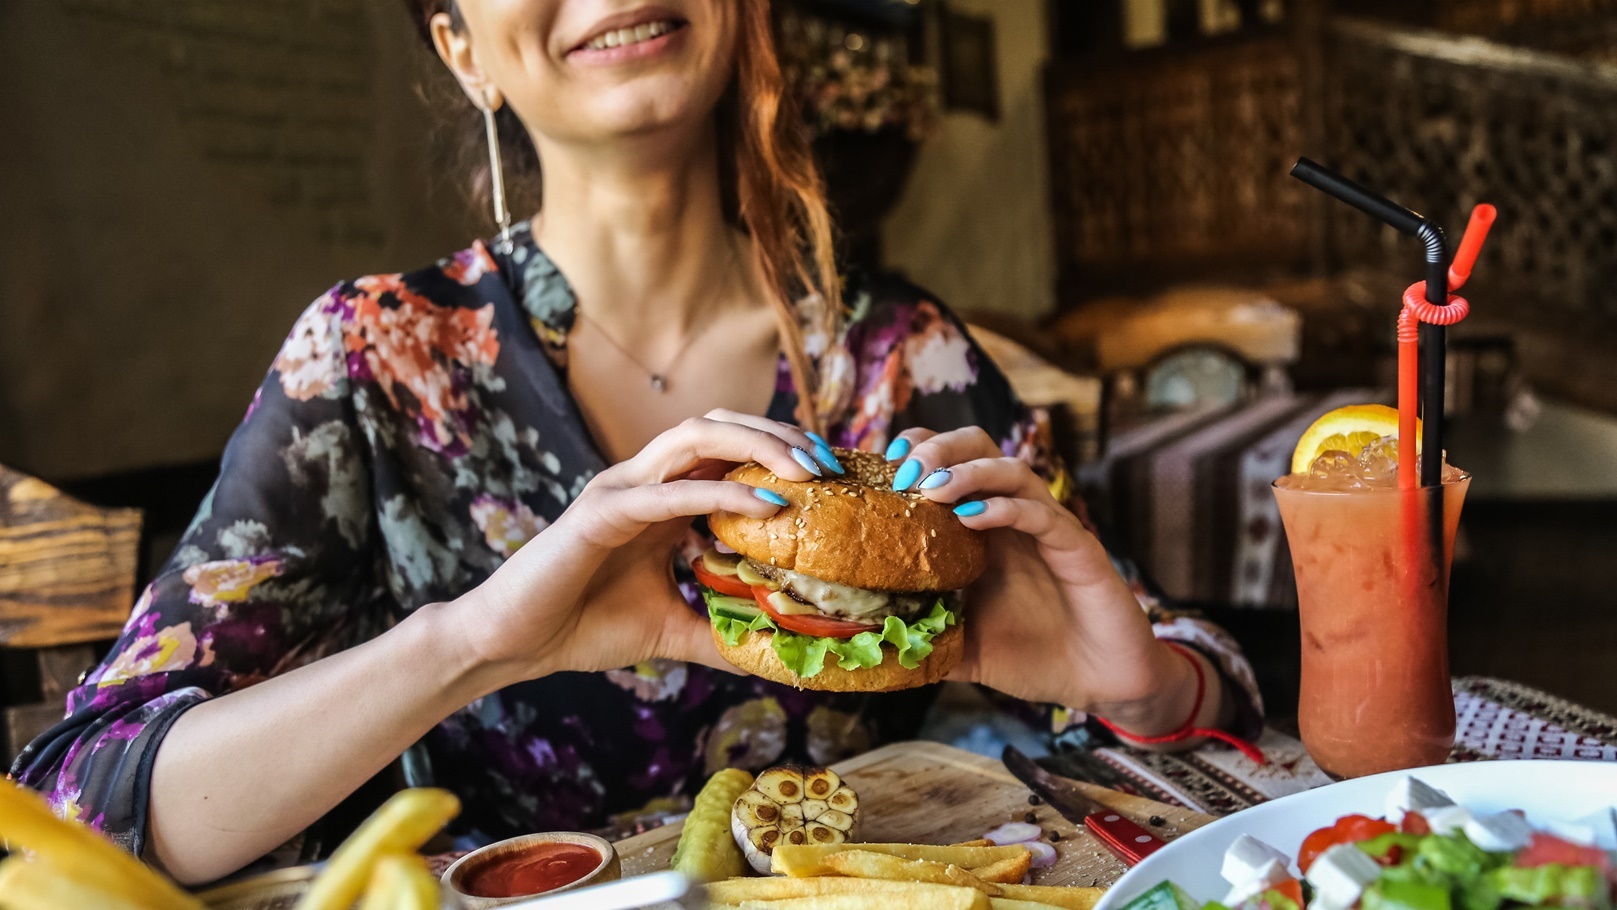 side-view-woman-eating-meat-burger-with-fries-ketc-2021-08-31-16-11-29-utc